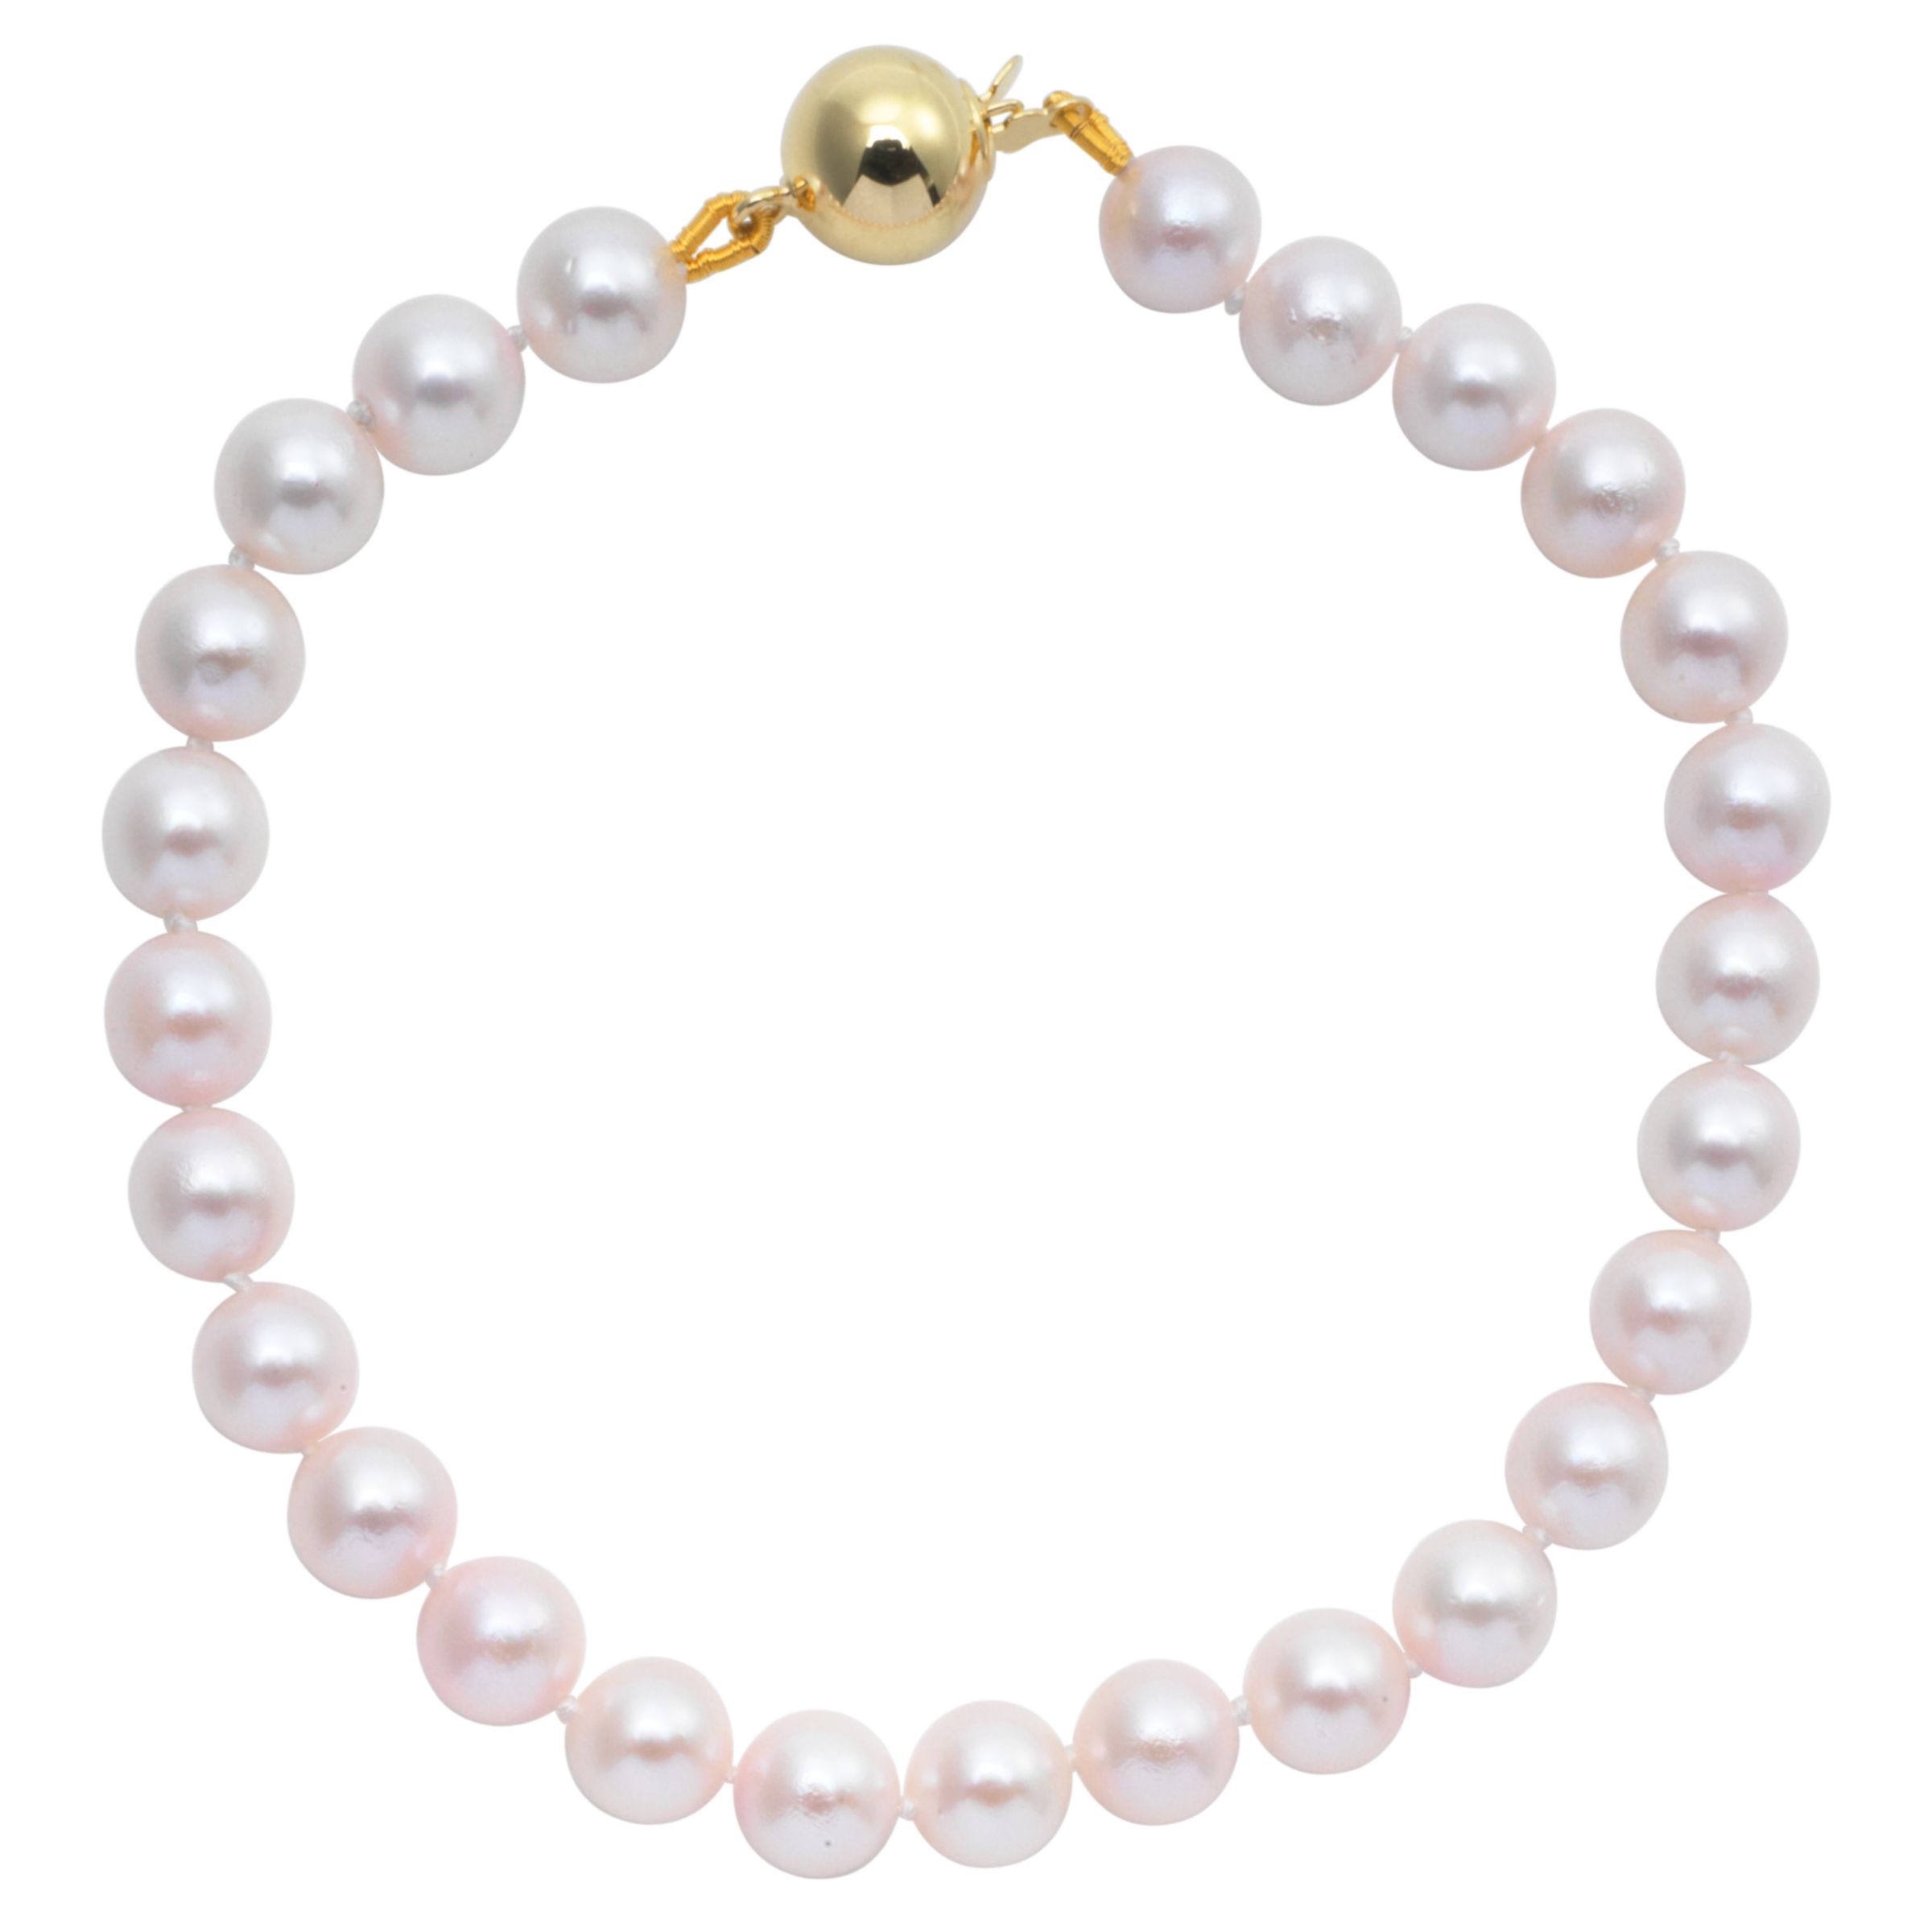 Cultured Pearls Knotted 7.5" Bracelet with Gold Clasp at John Lewis